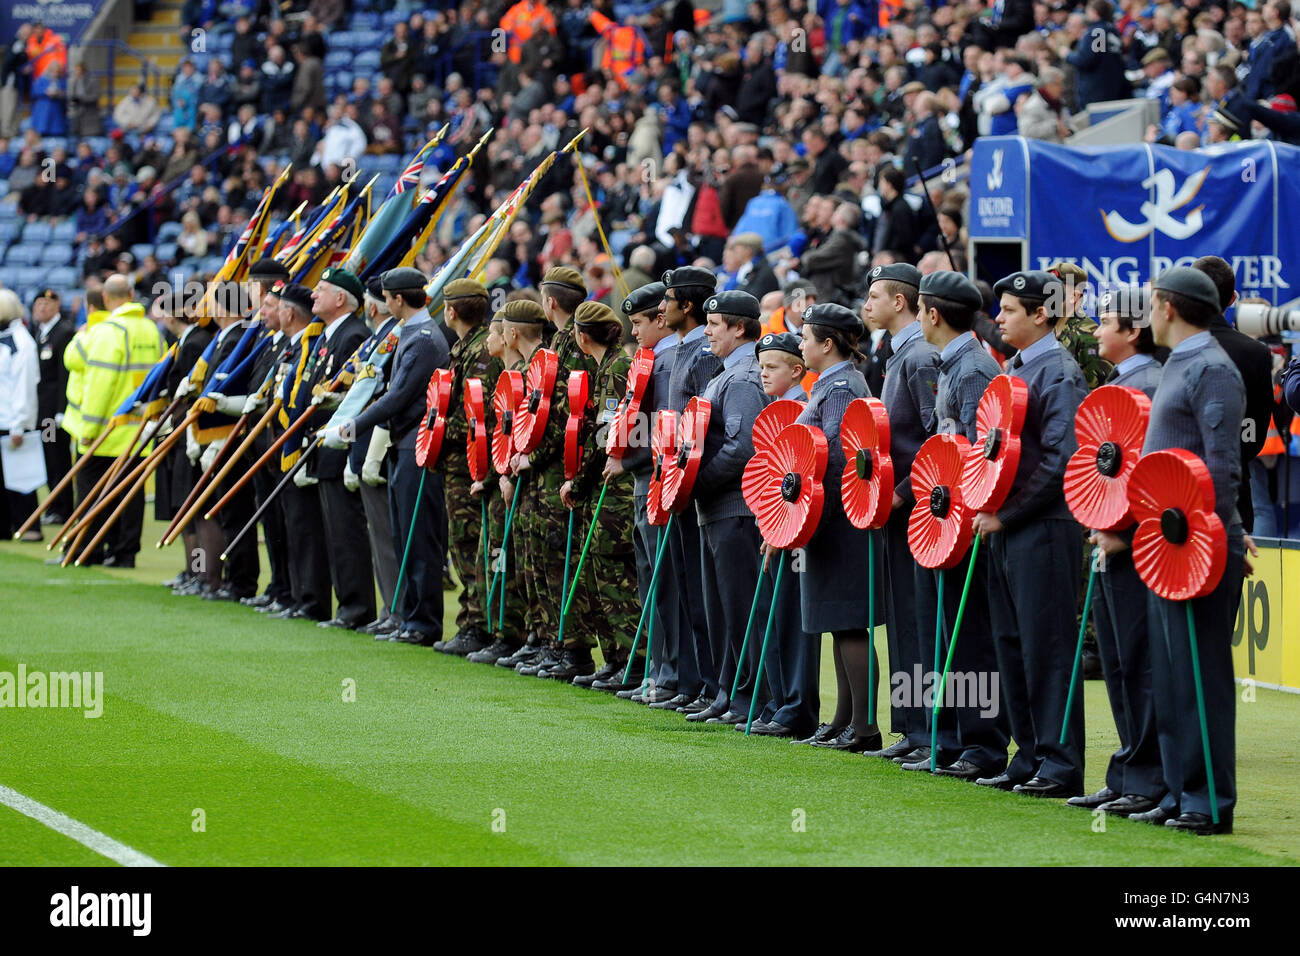 Soccer - npower Football League Championship - Leicester City v Leeds United - King Power Stadium. Members of the armed force hold giant poppies in a line inside the King Power Stadium prior to kick-off Stock Photo